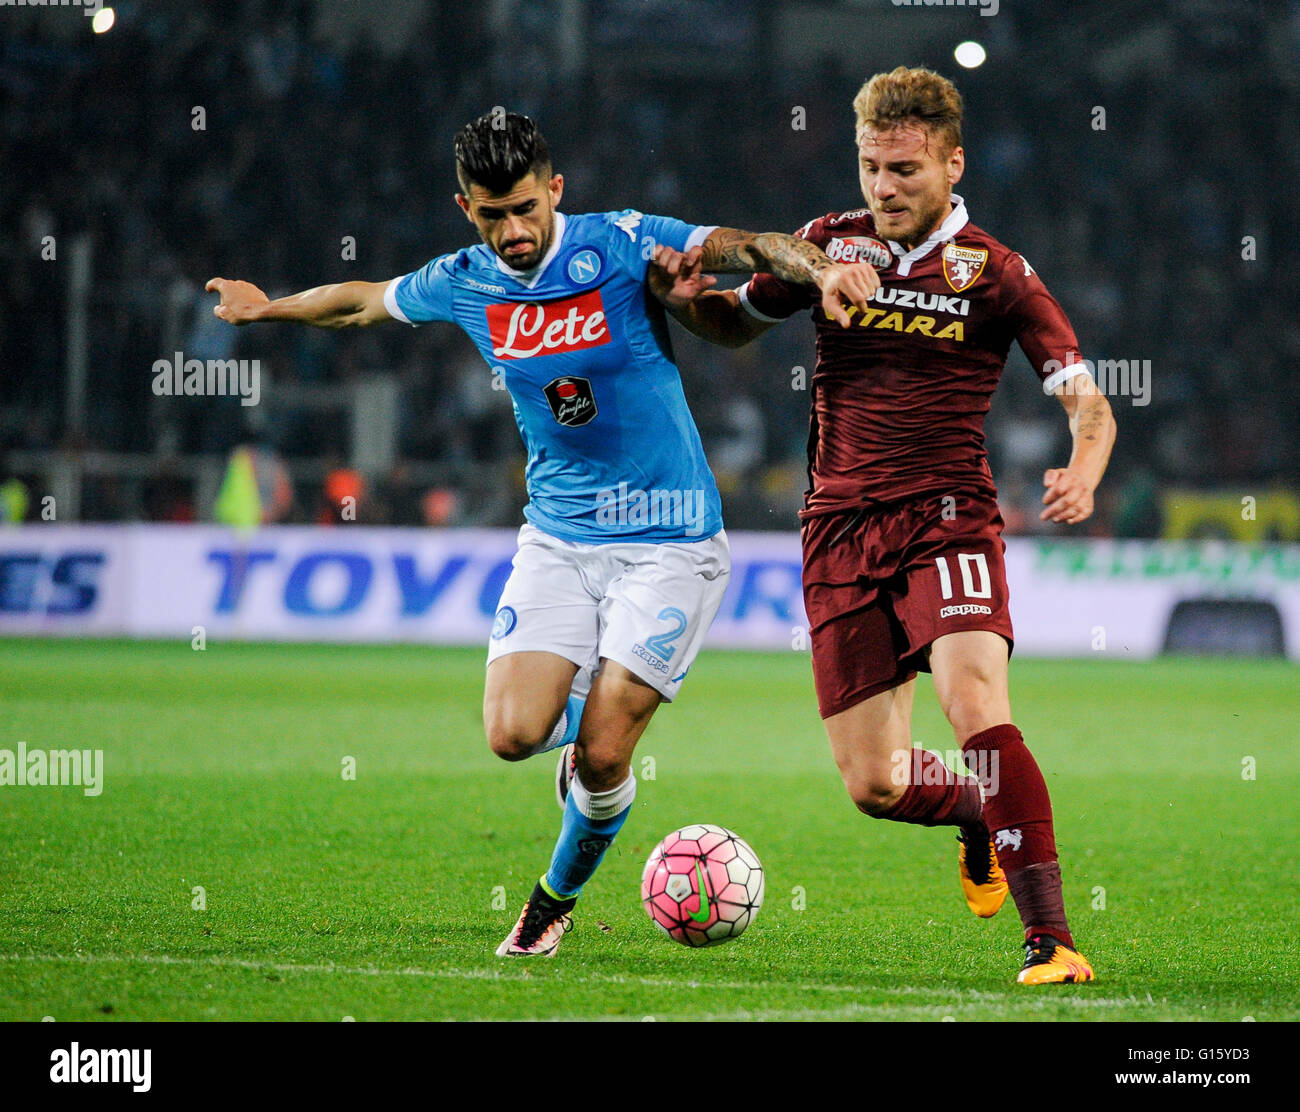 Turin, Italy. 8 may, 2016: Elseid Hysaj (left) and Ciro Immobile compete for the ball during the Serie A football match between Torino FC and SSC Napoli Stock Photo